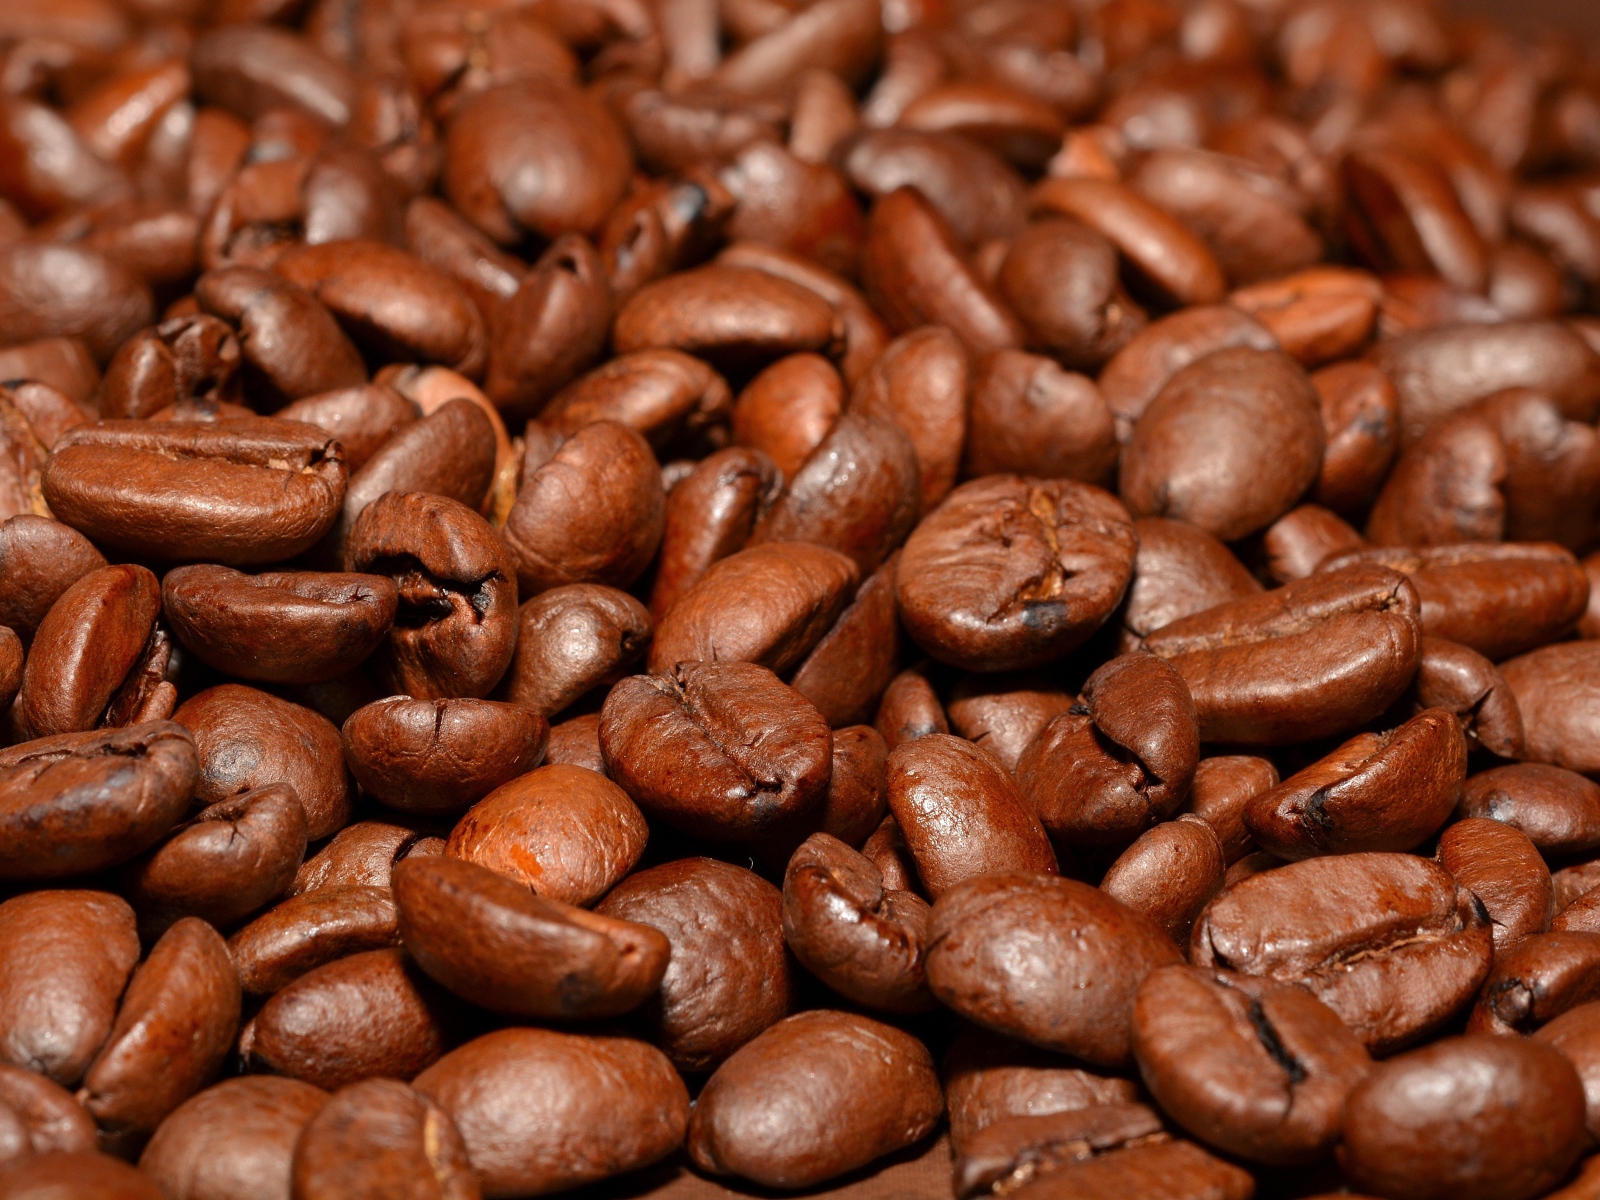 Lots of fragrant roasted coffee beans close-up